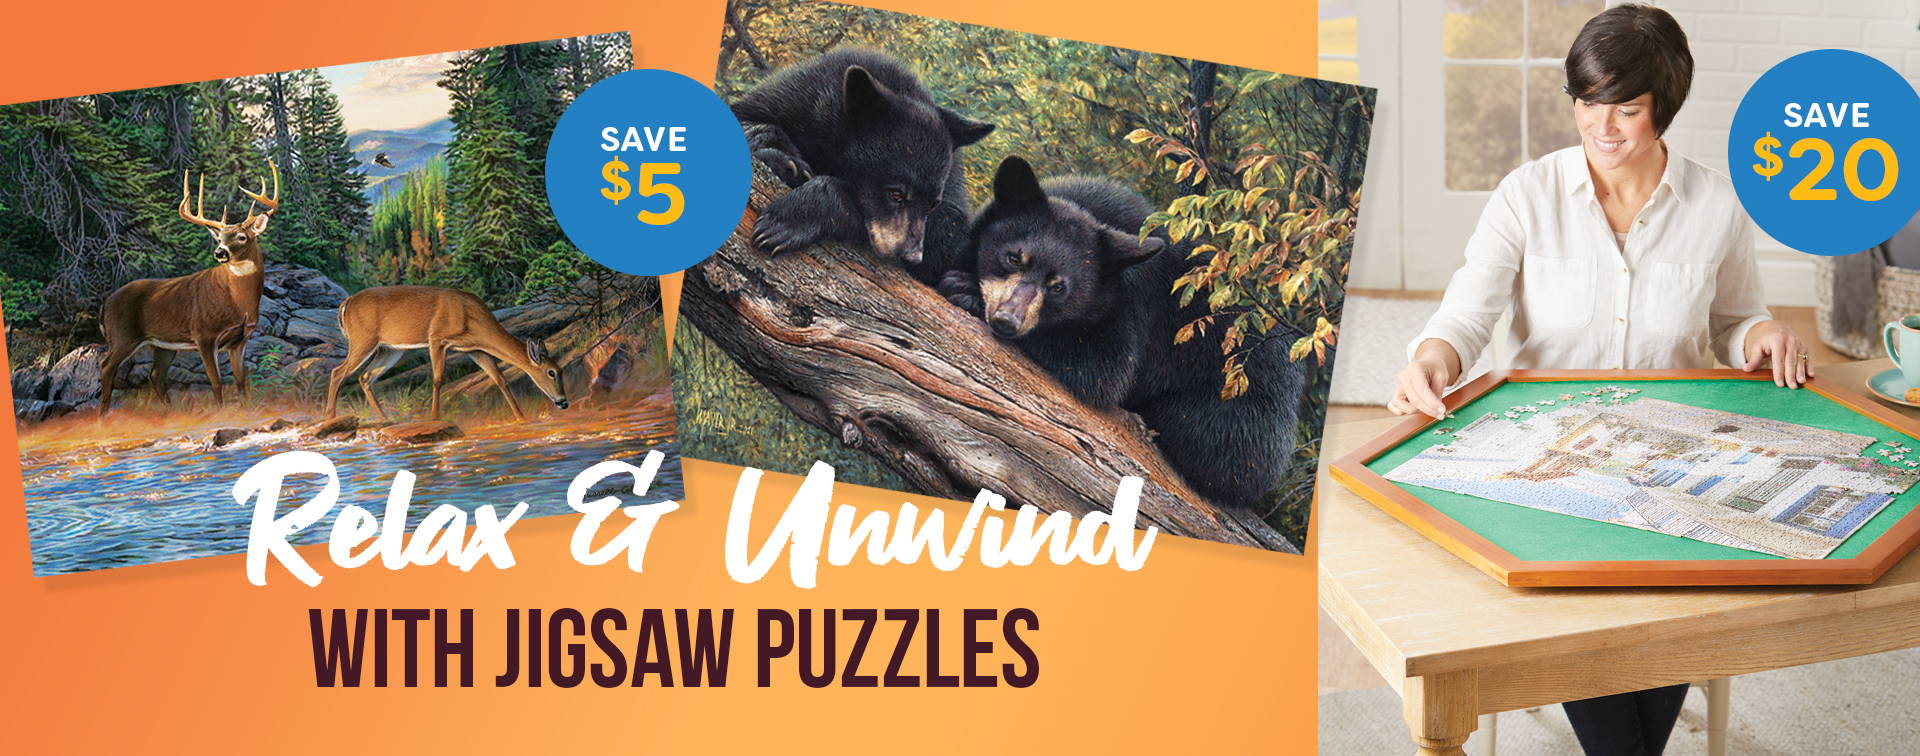 Relax & Unwind with Jigsaw puzzles